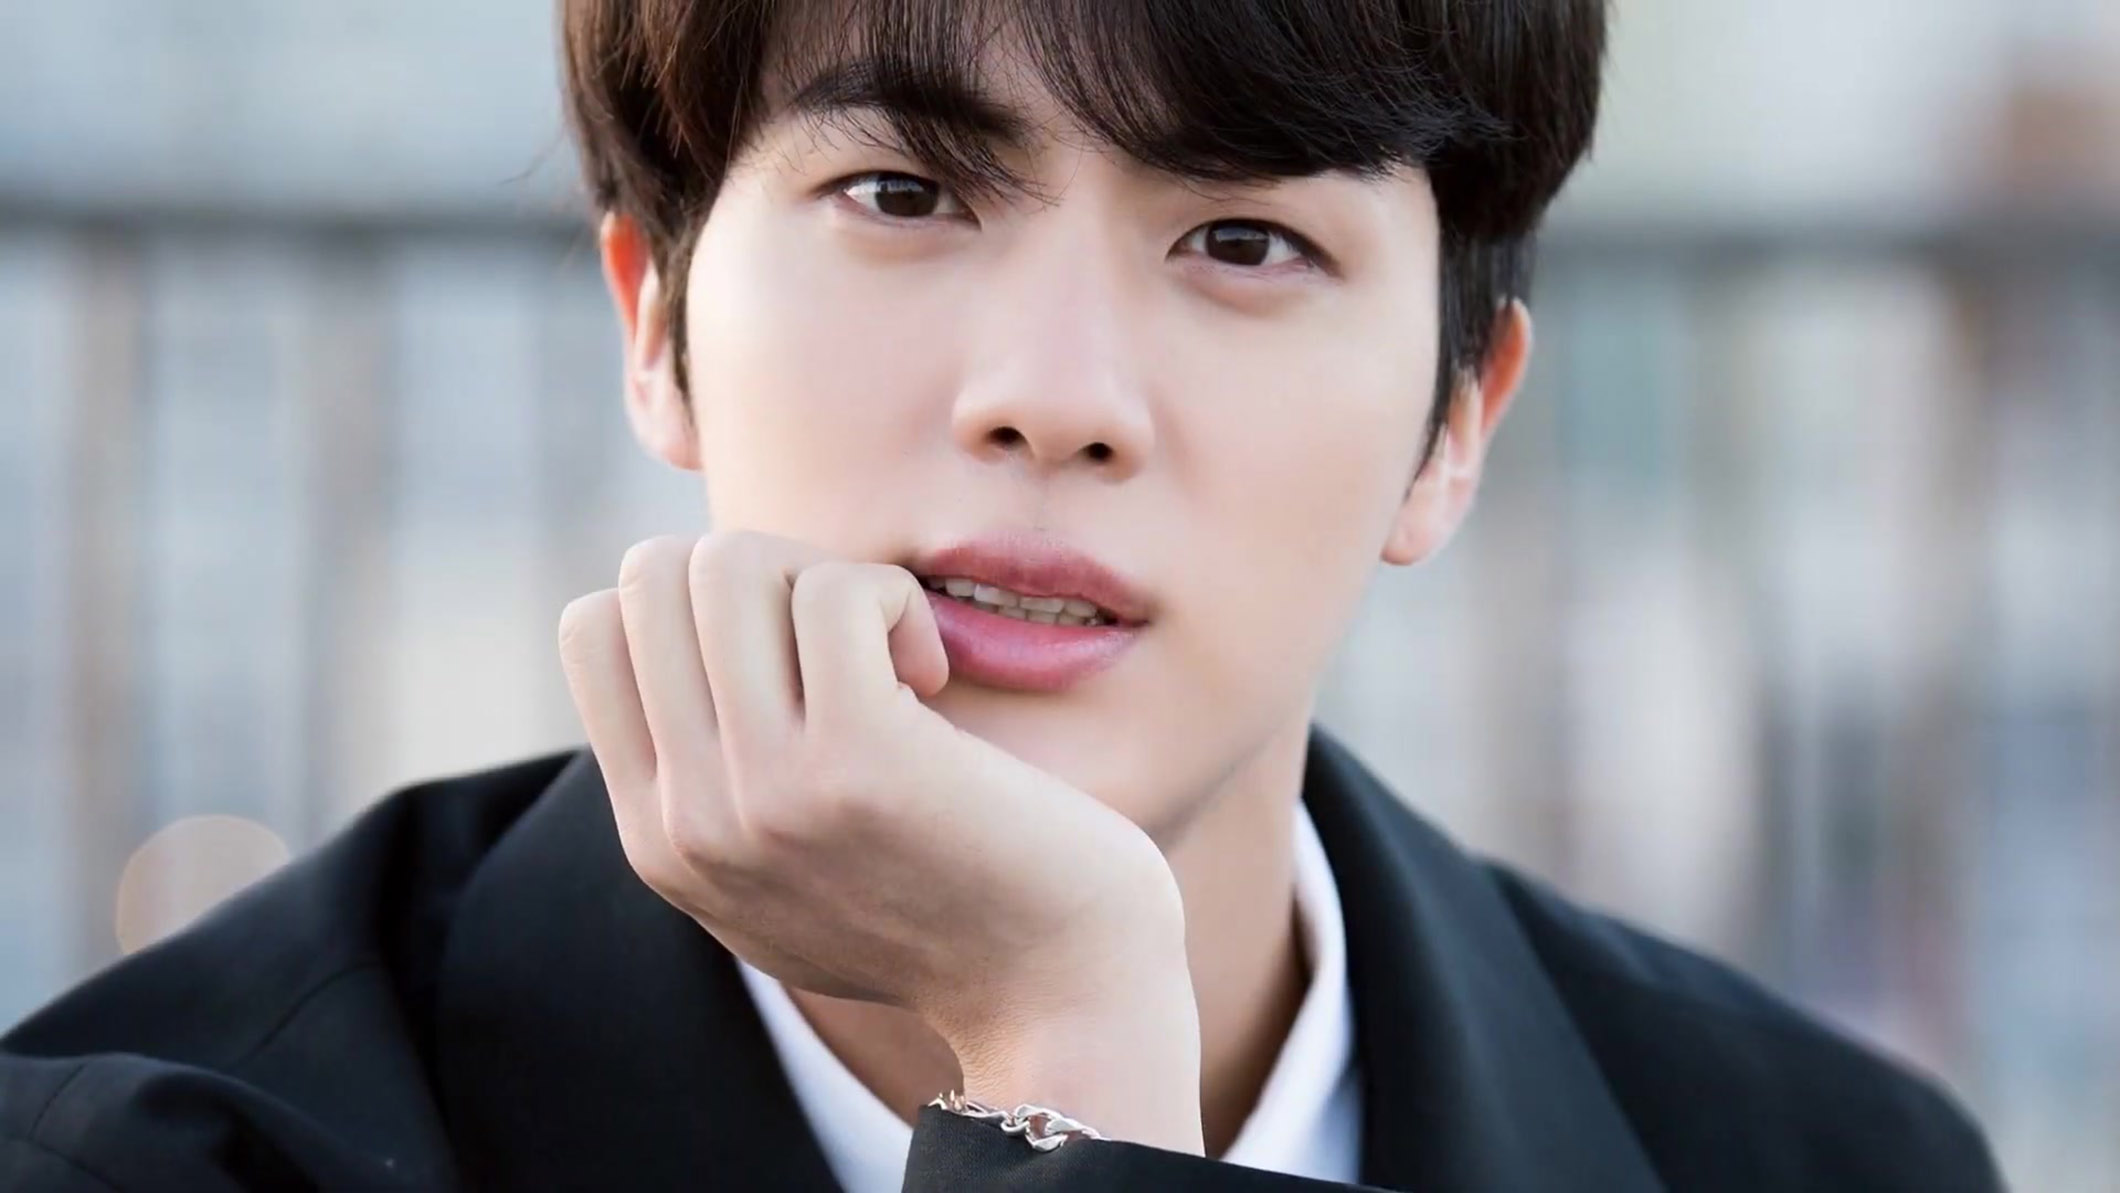 Get to know BTS's Jin: His age, birthday, songs, and more – Film Daily